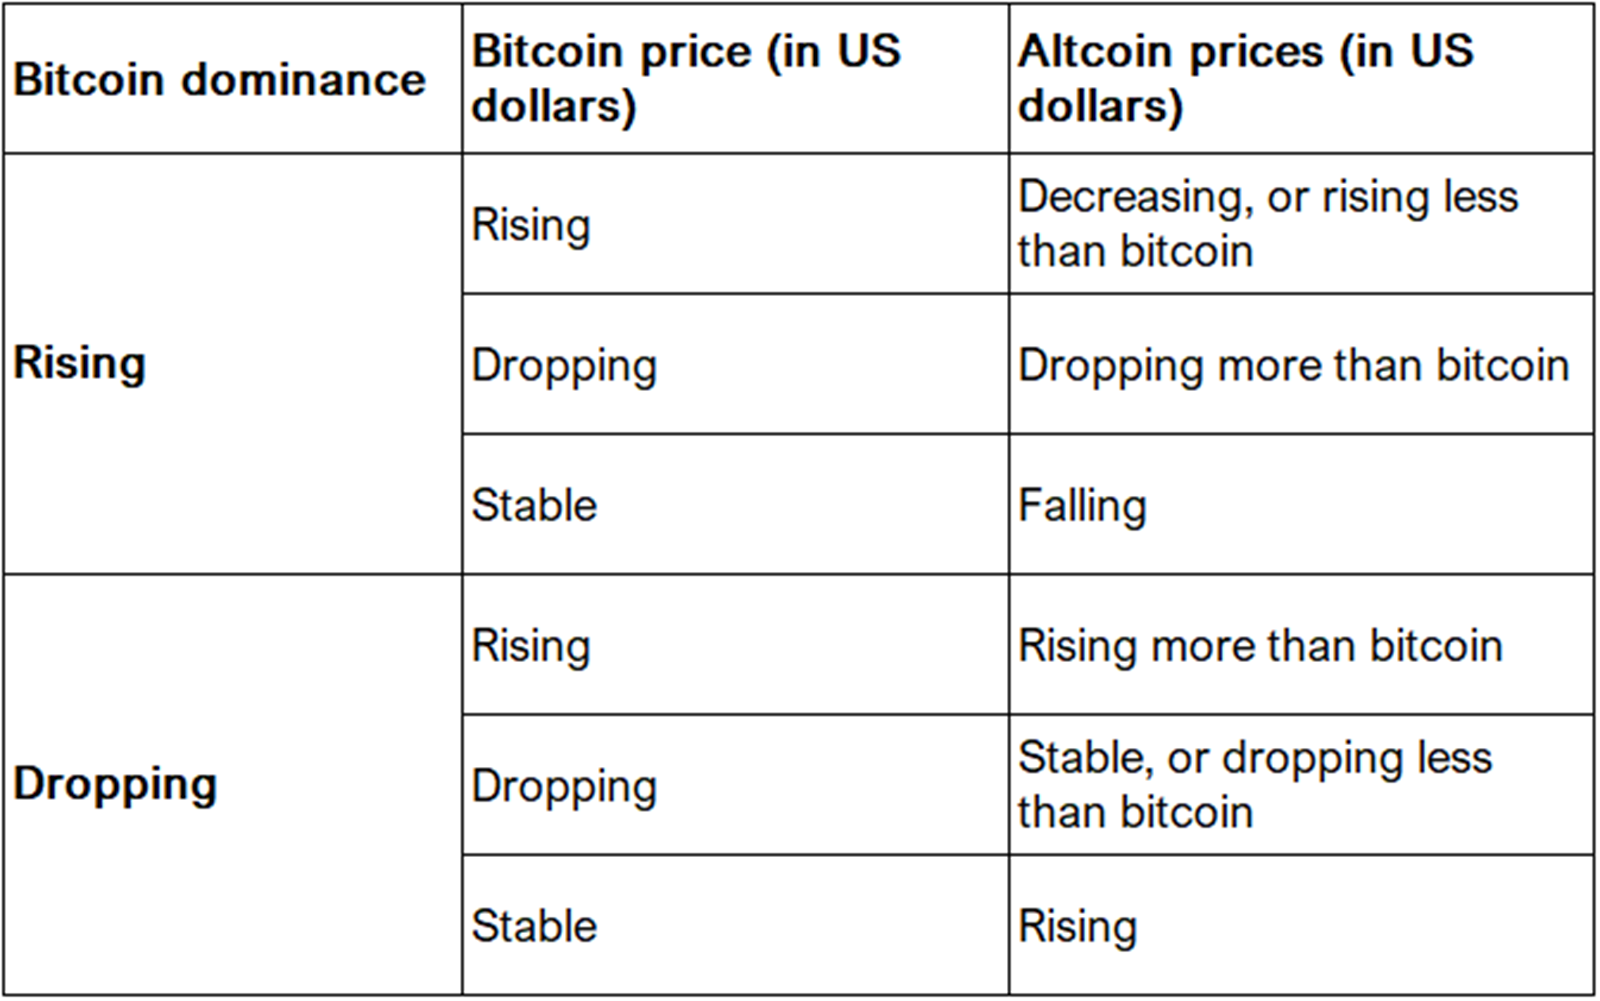 Relationship between bitcoin dominance, bitcoin’s price, and altcoin prices.